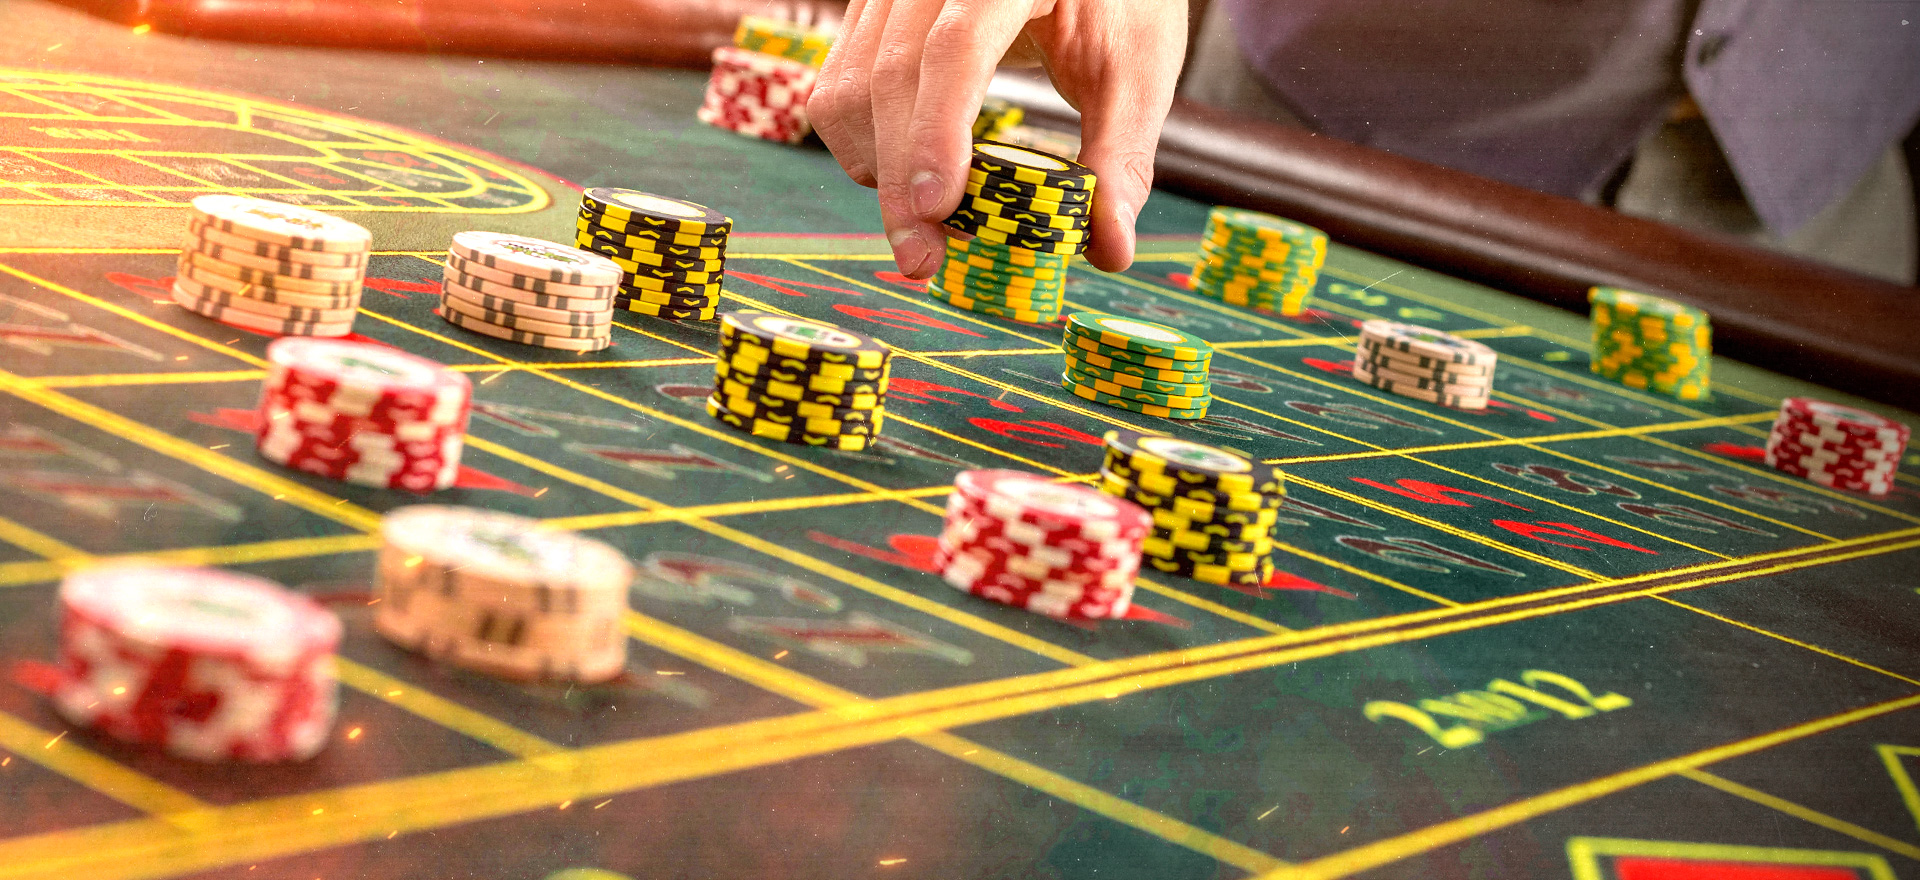 The blog says about gambling: an important article